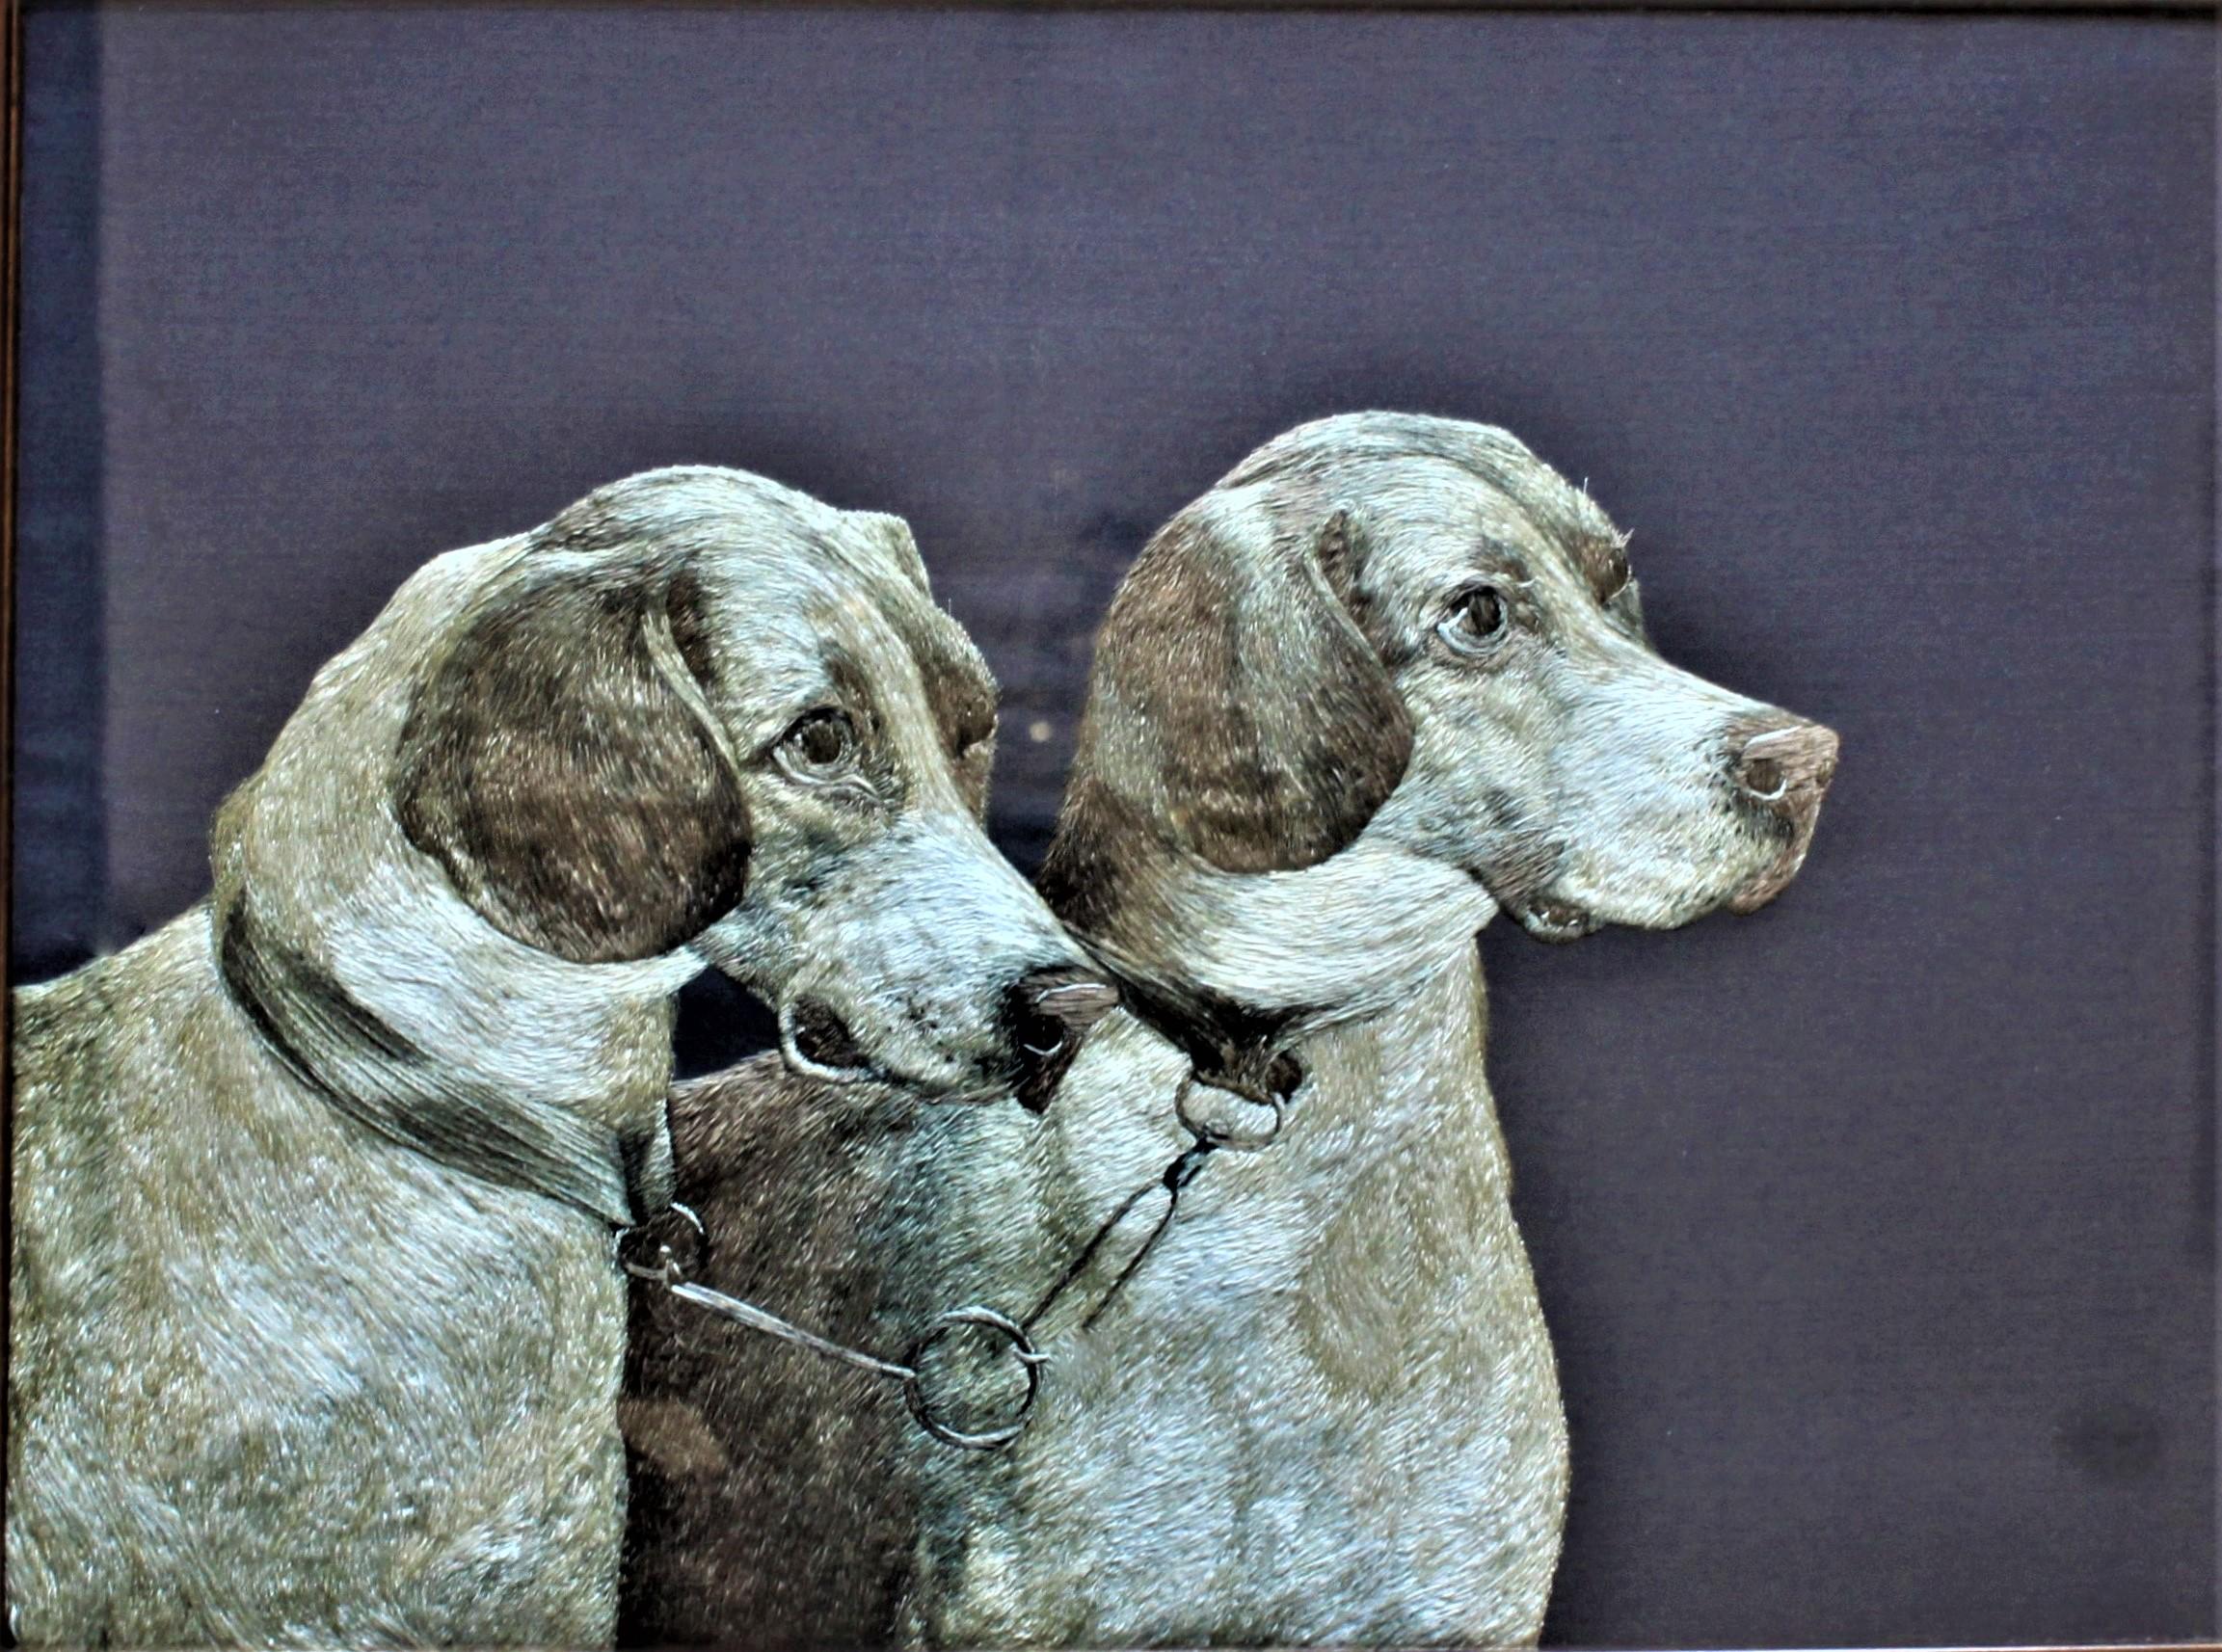 Presumed to having its origins in the United States and done in the Arts & Crafts period, this extremely intricate and realistic depiction of two hound dogs bridled together is done completely in various colors of silk thread. The faces and bodies